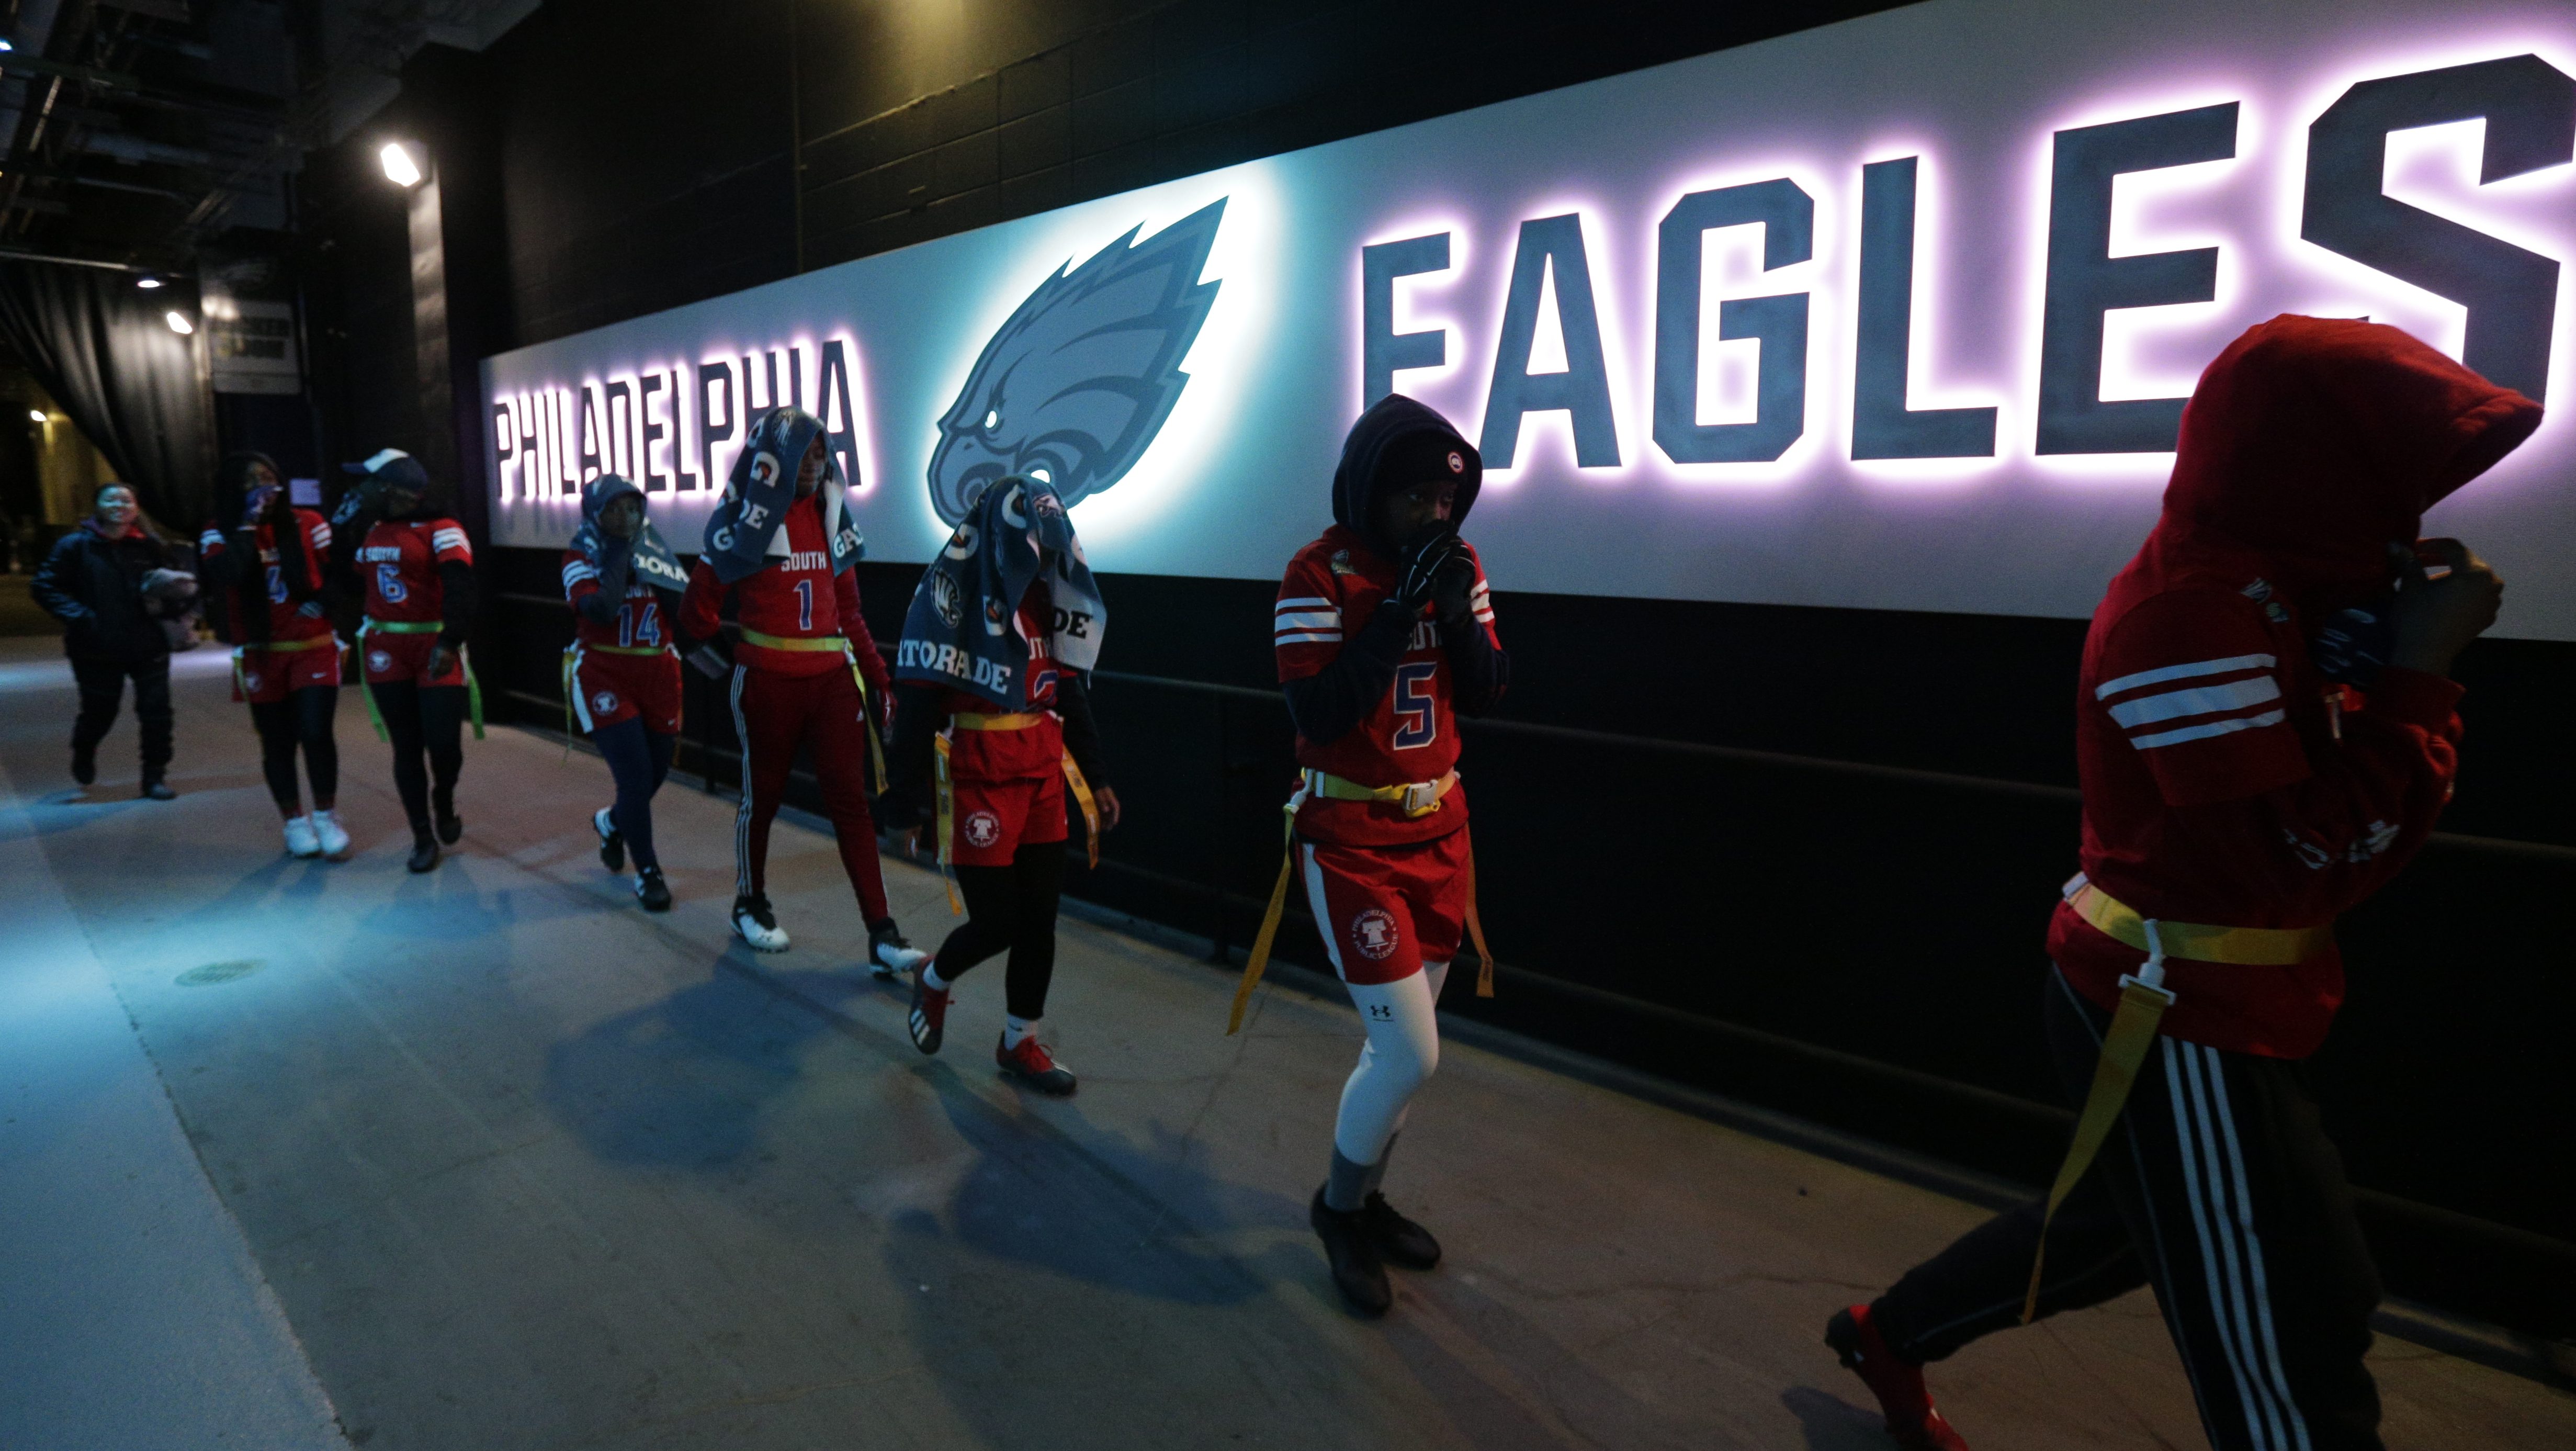 How the Philadelphia Eagles Got More Girls into Flag Football with